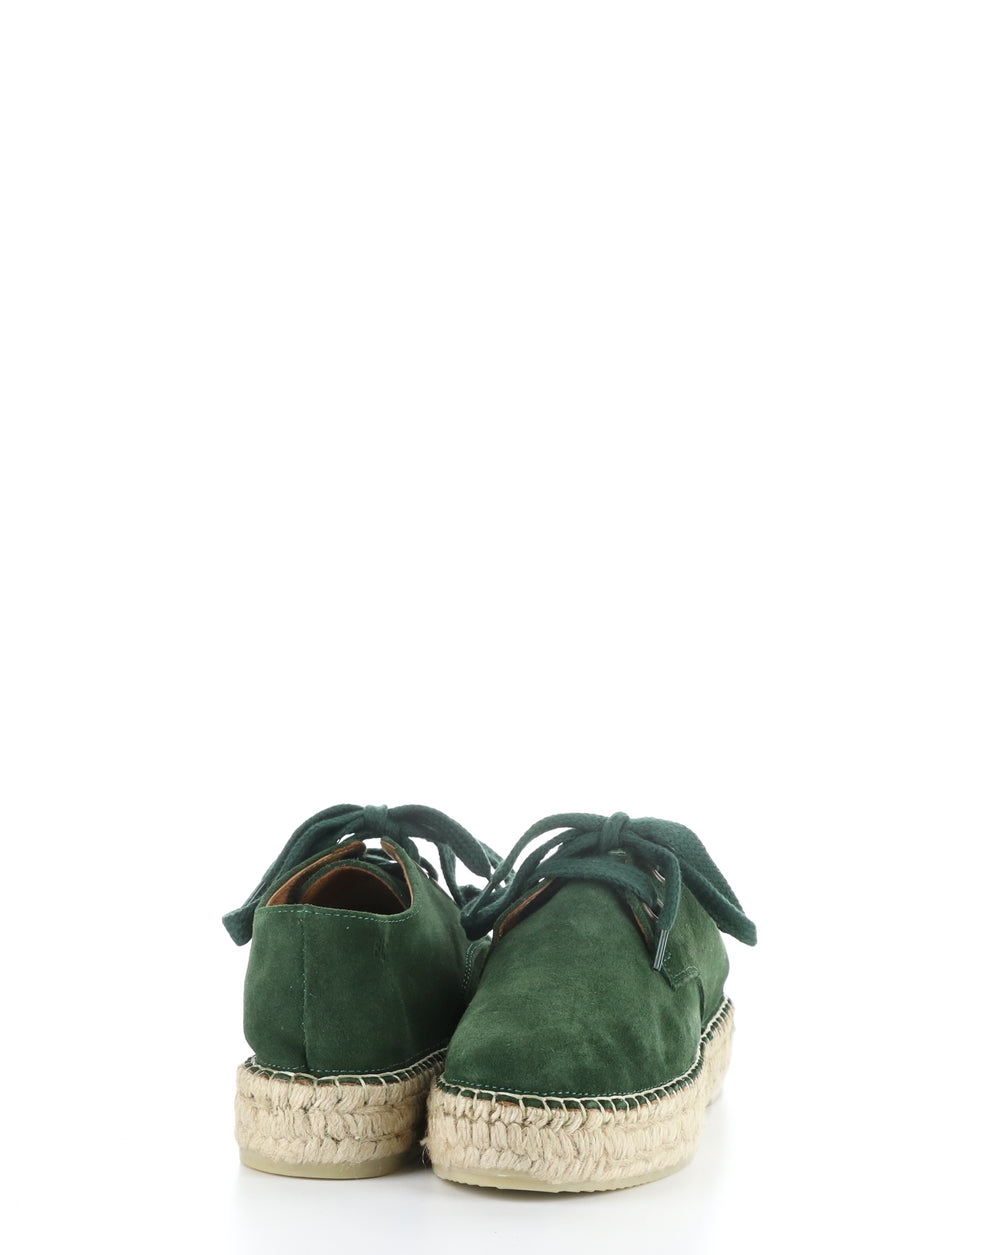 PETH525FLY 001 DARK GREEN Lace-up Shoes